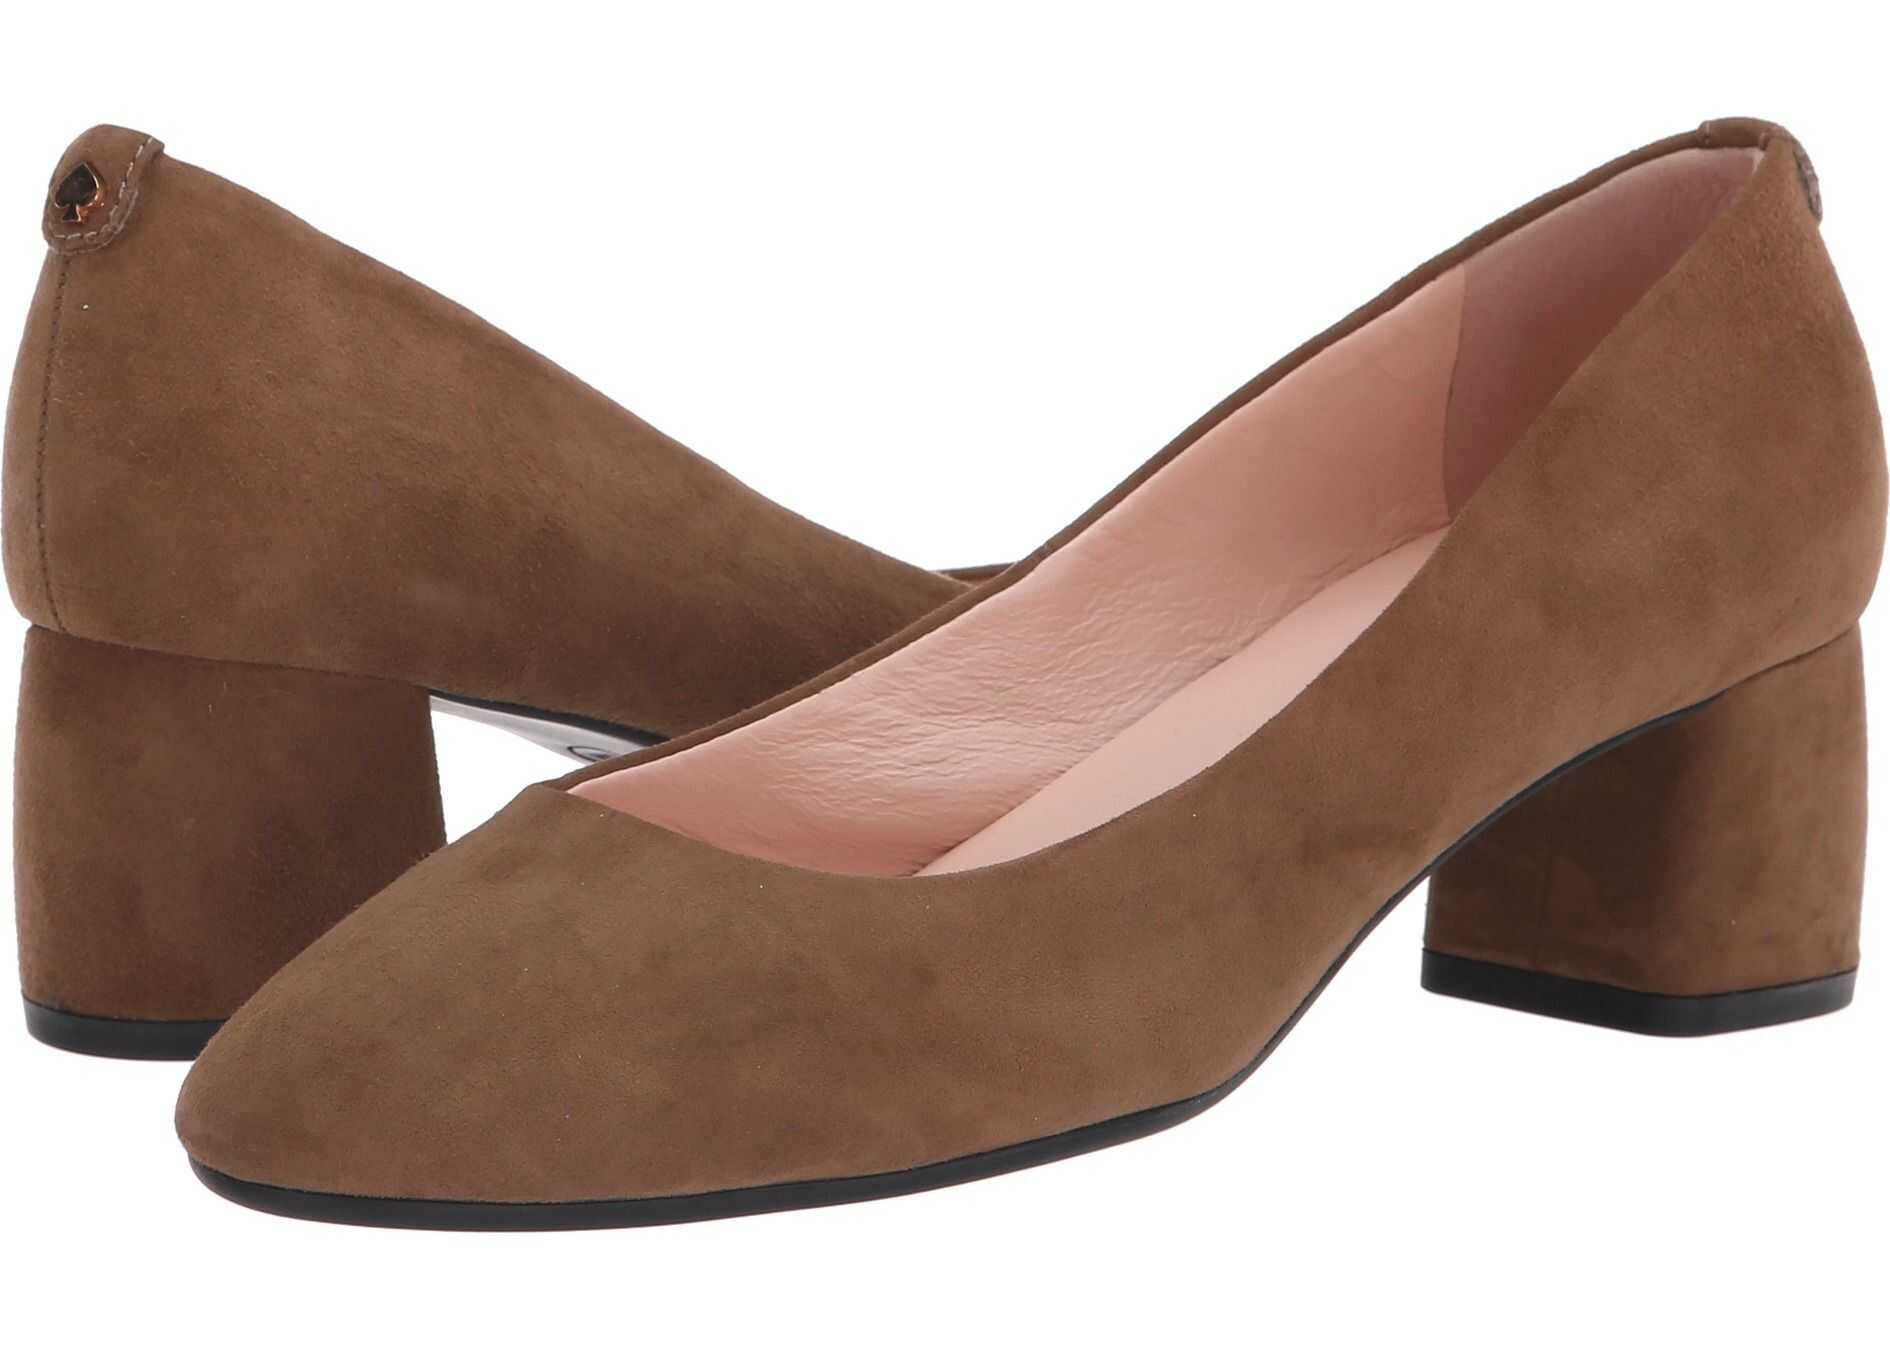 Kate Spade New York Beverly New Taupe Suede